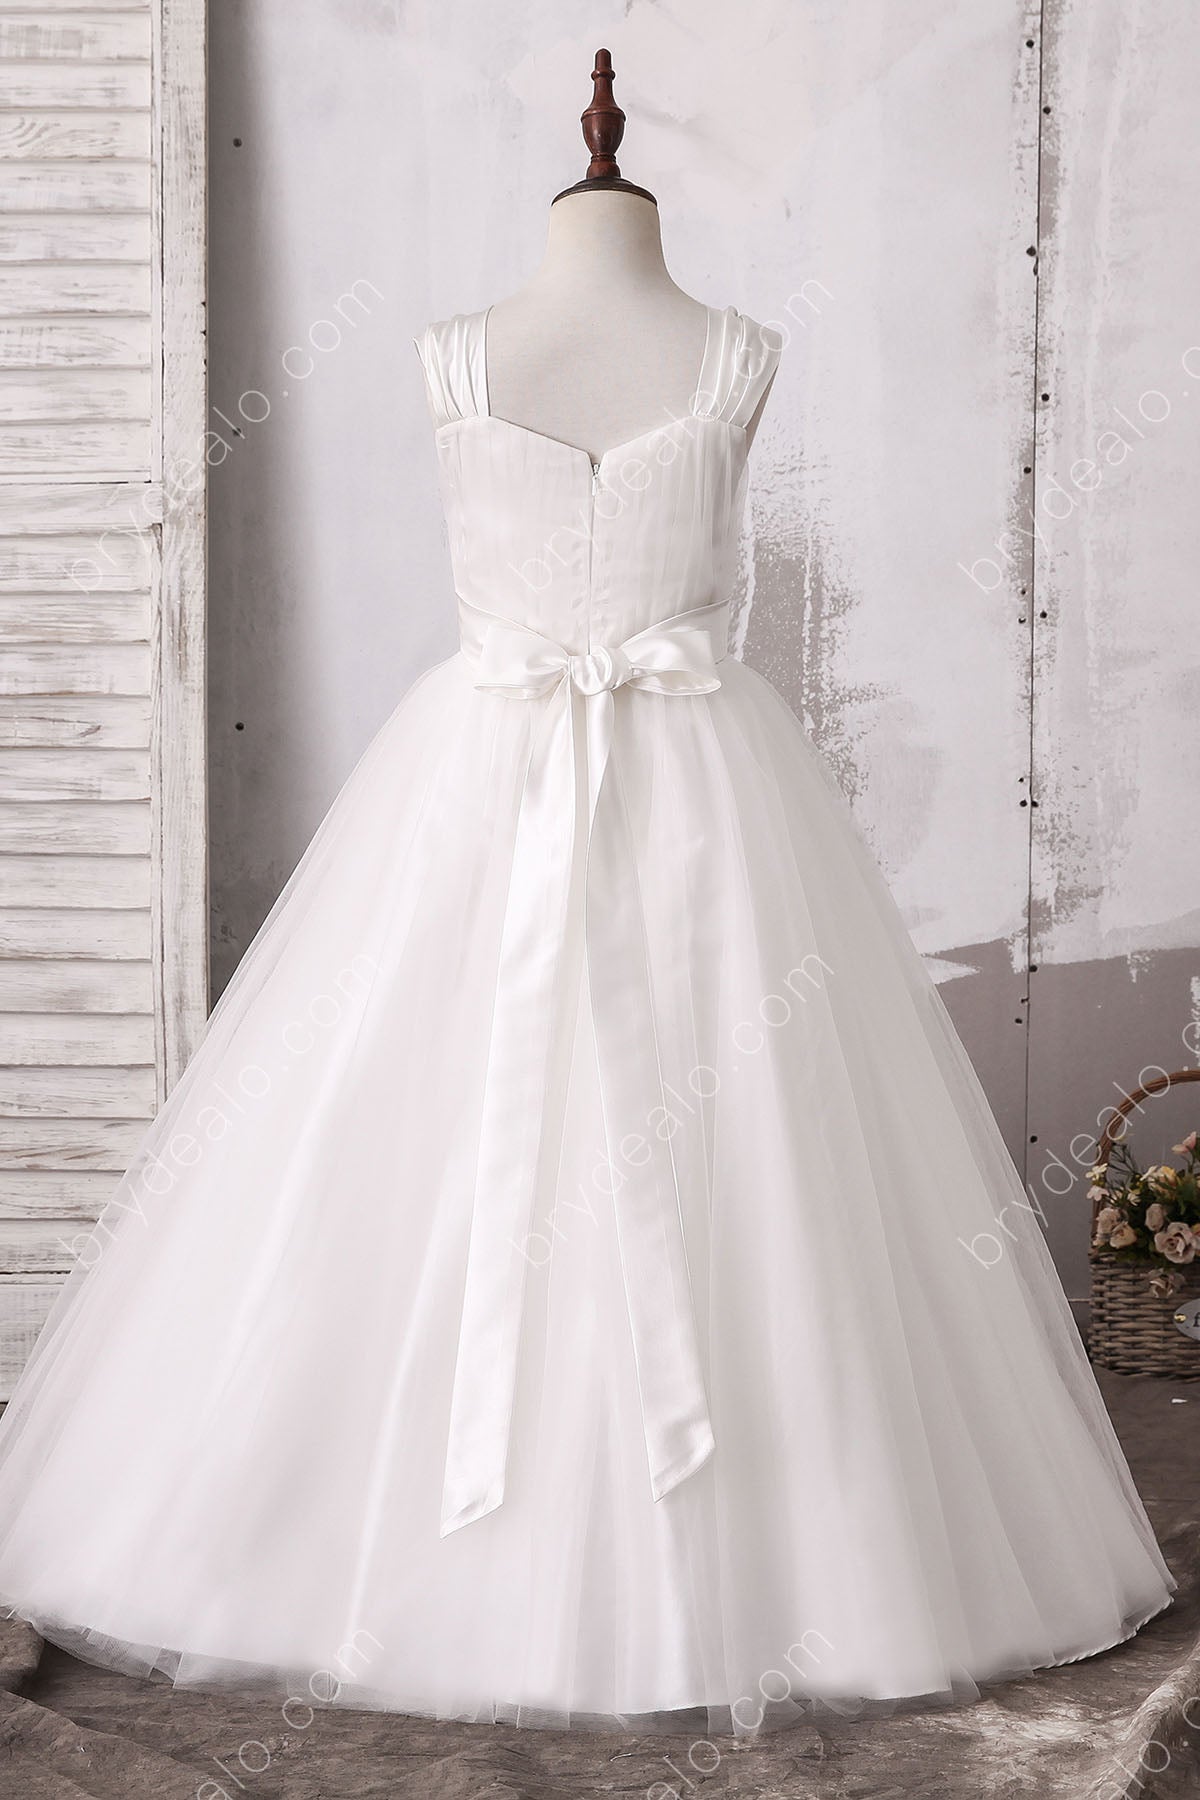 Ruched Tulle Sleeveless Flower Girl Ball Gown